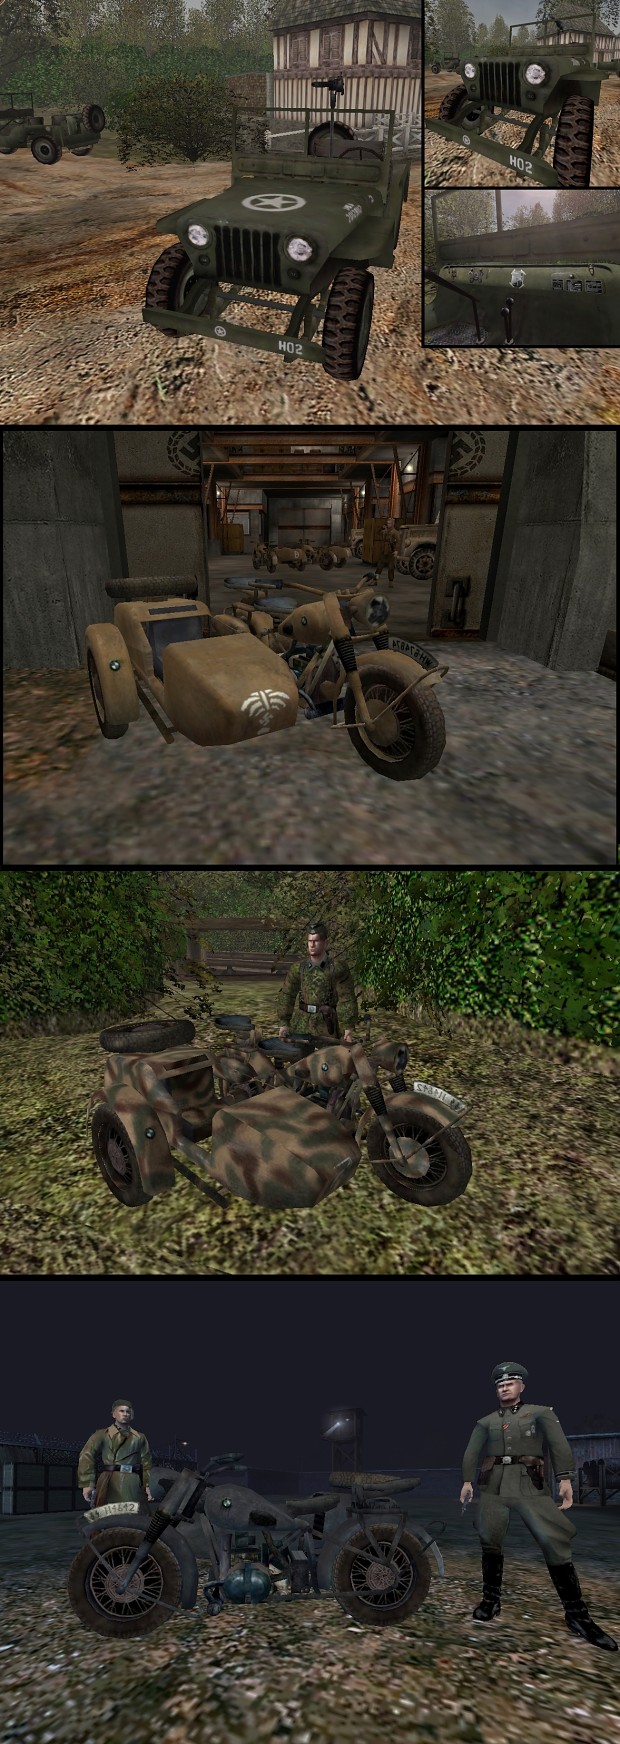 Vehicle retextures - Willys Jeep and BMW R75 Motorcycle